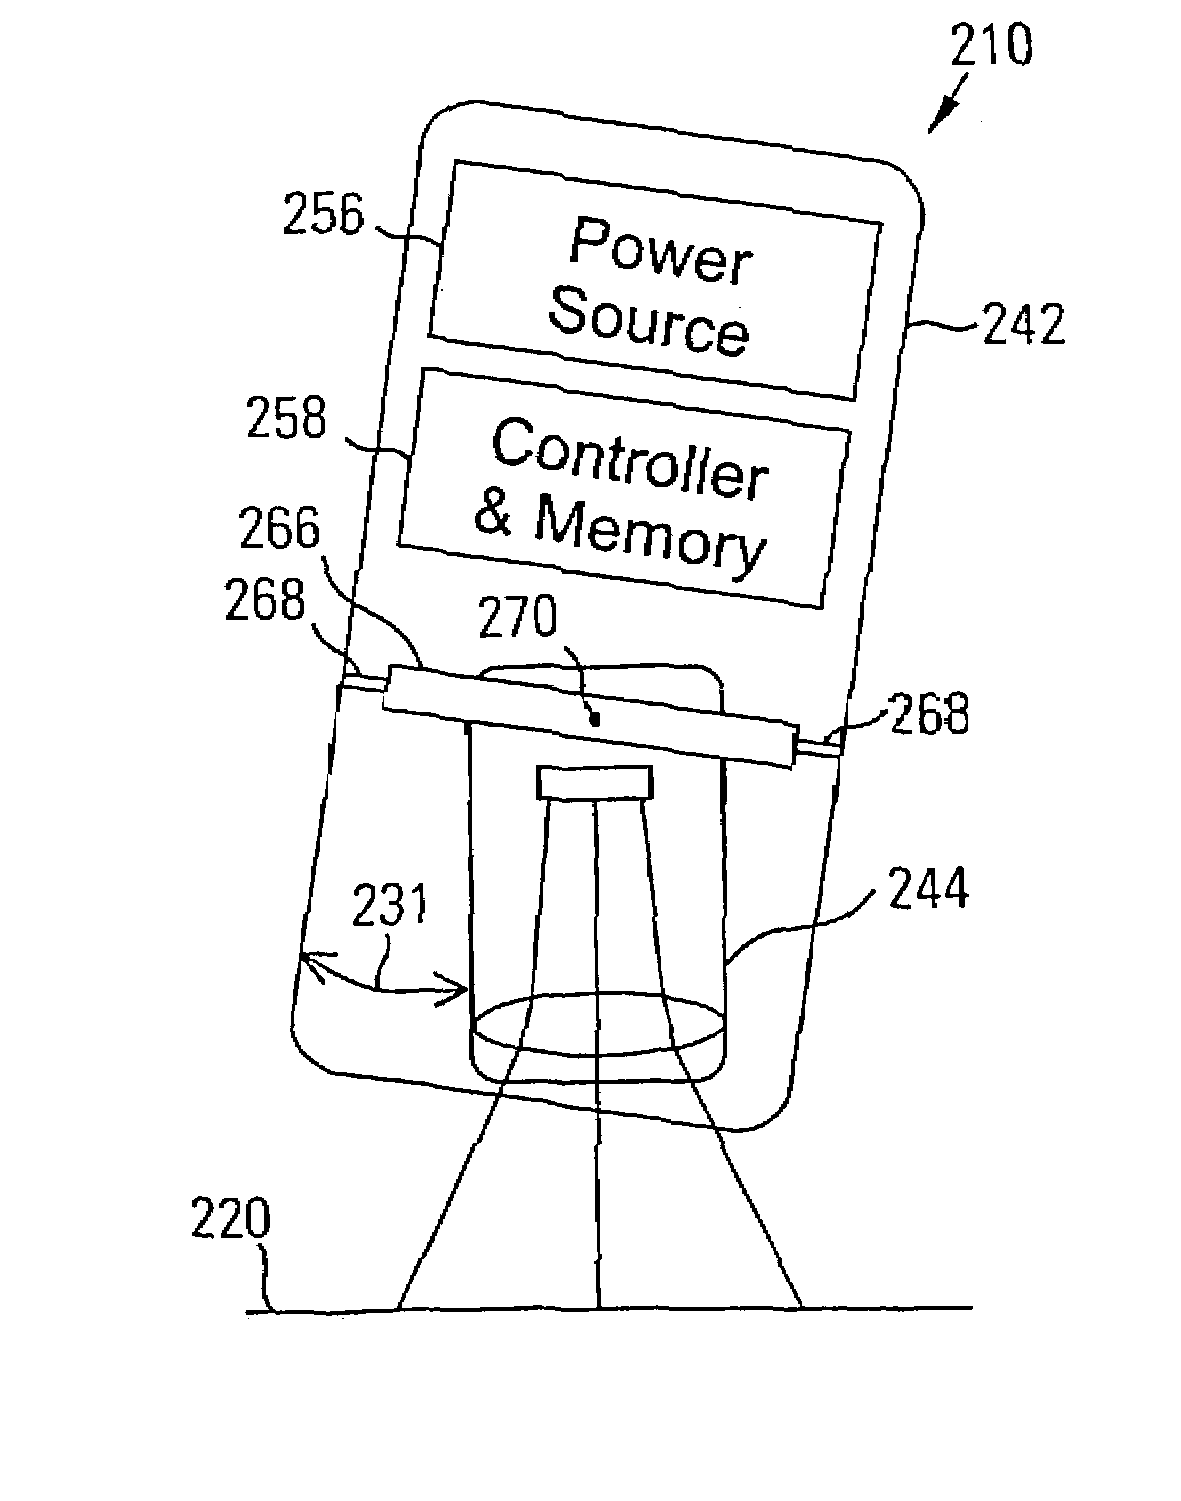 Gimbal optical system for document image capture